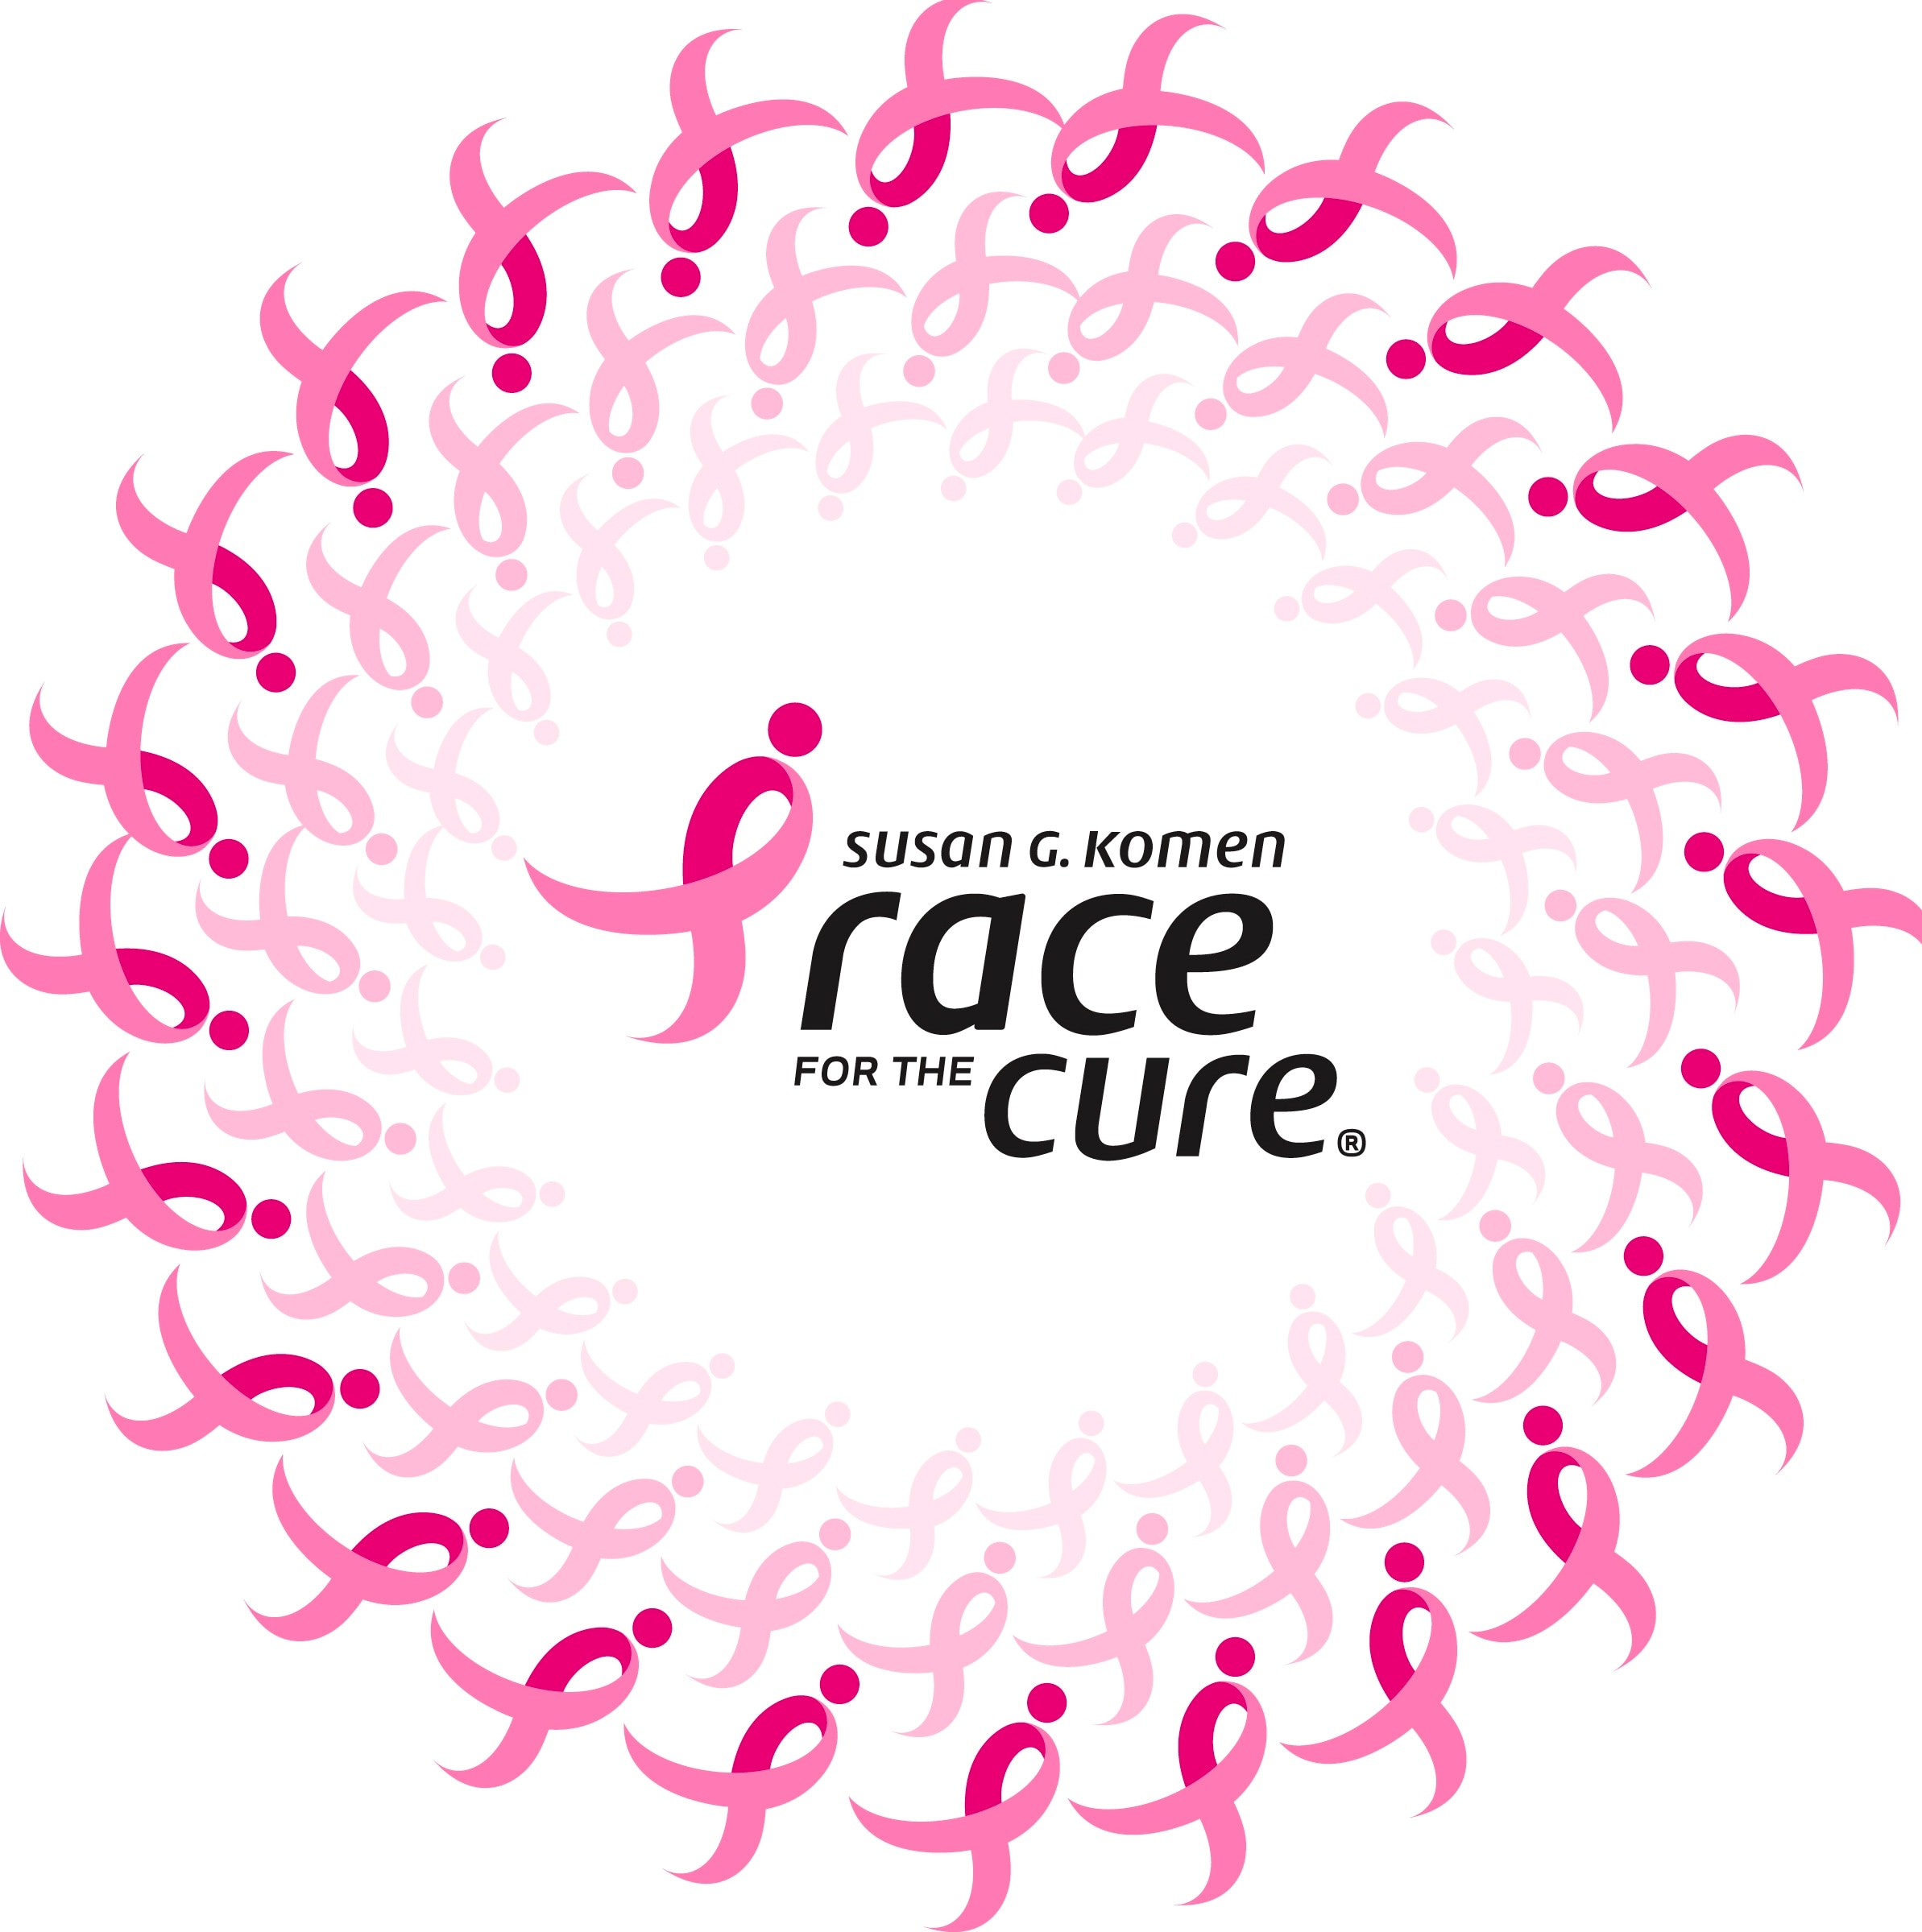 Ford cares race for the cure pictures #3